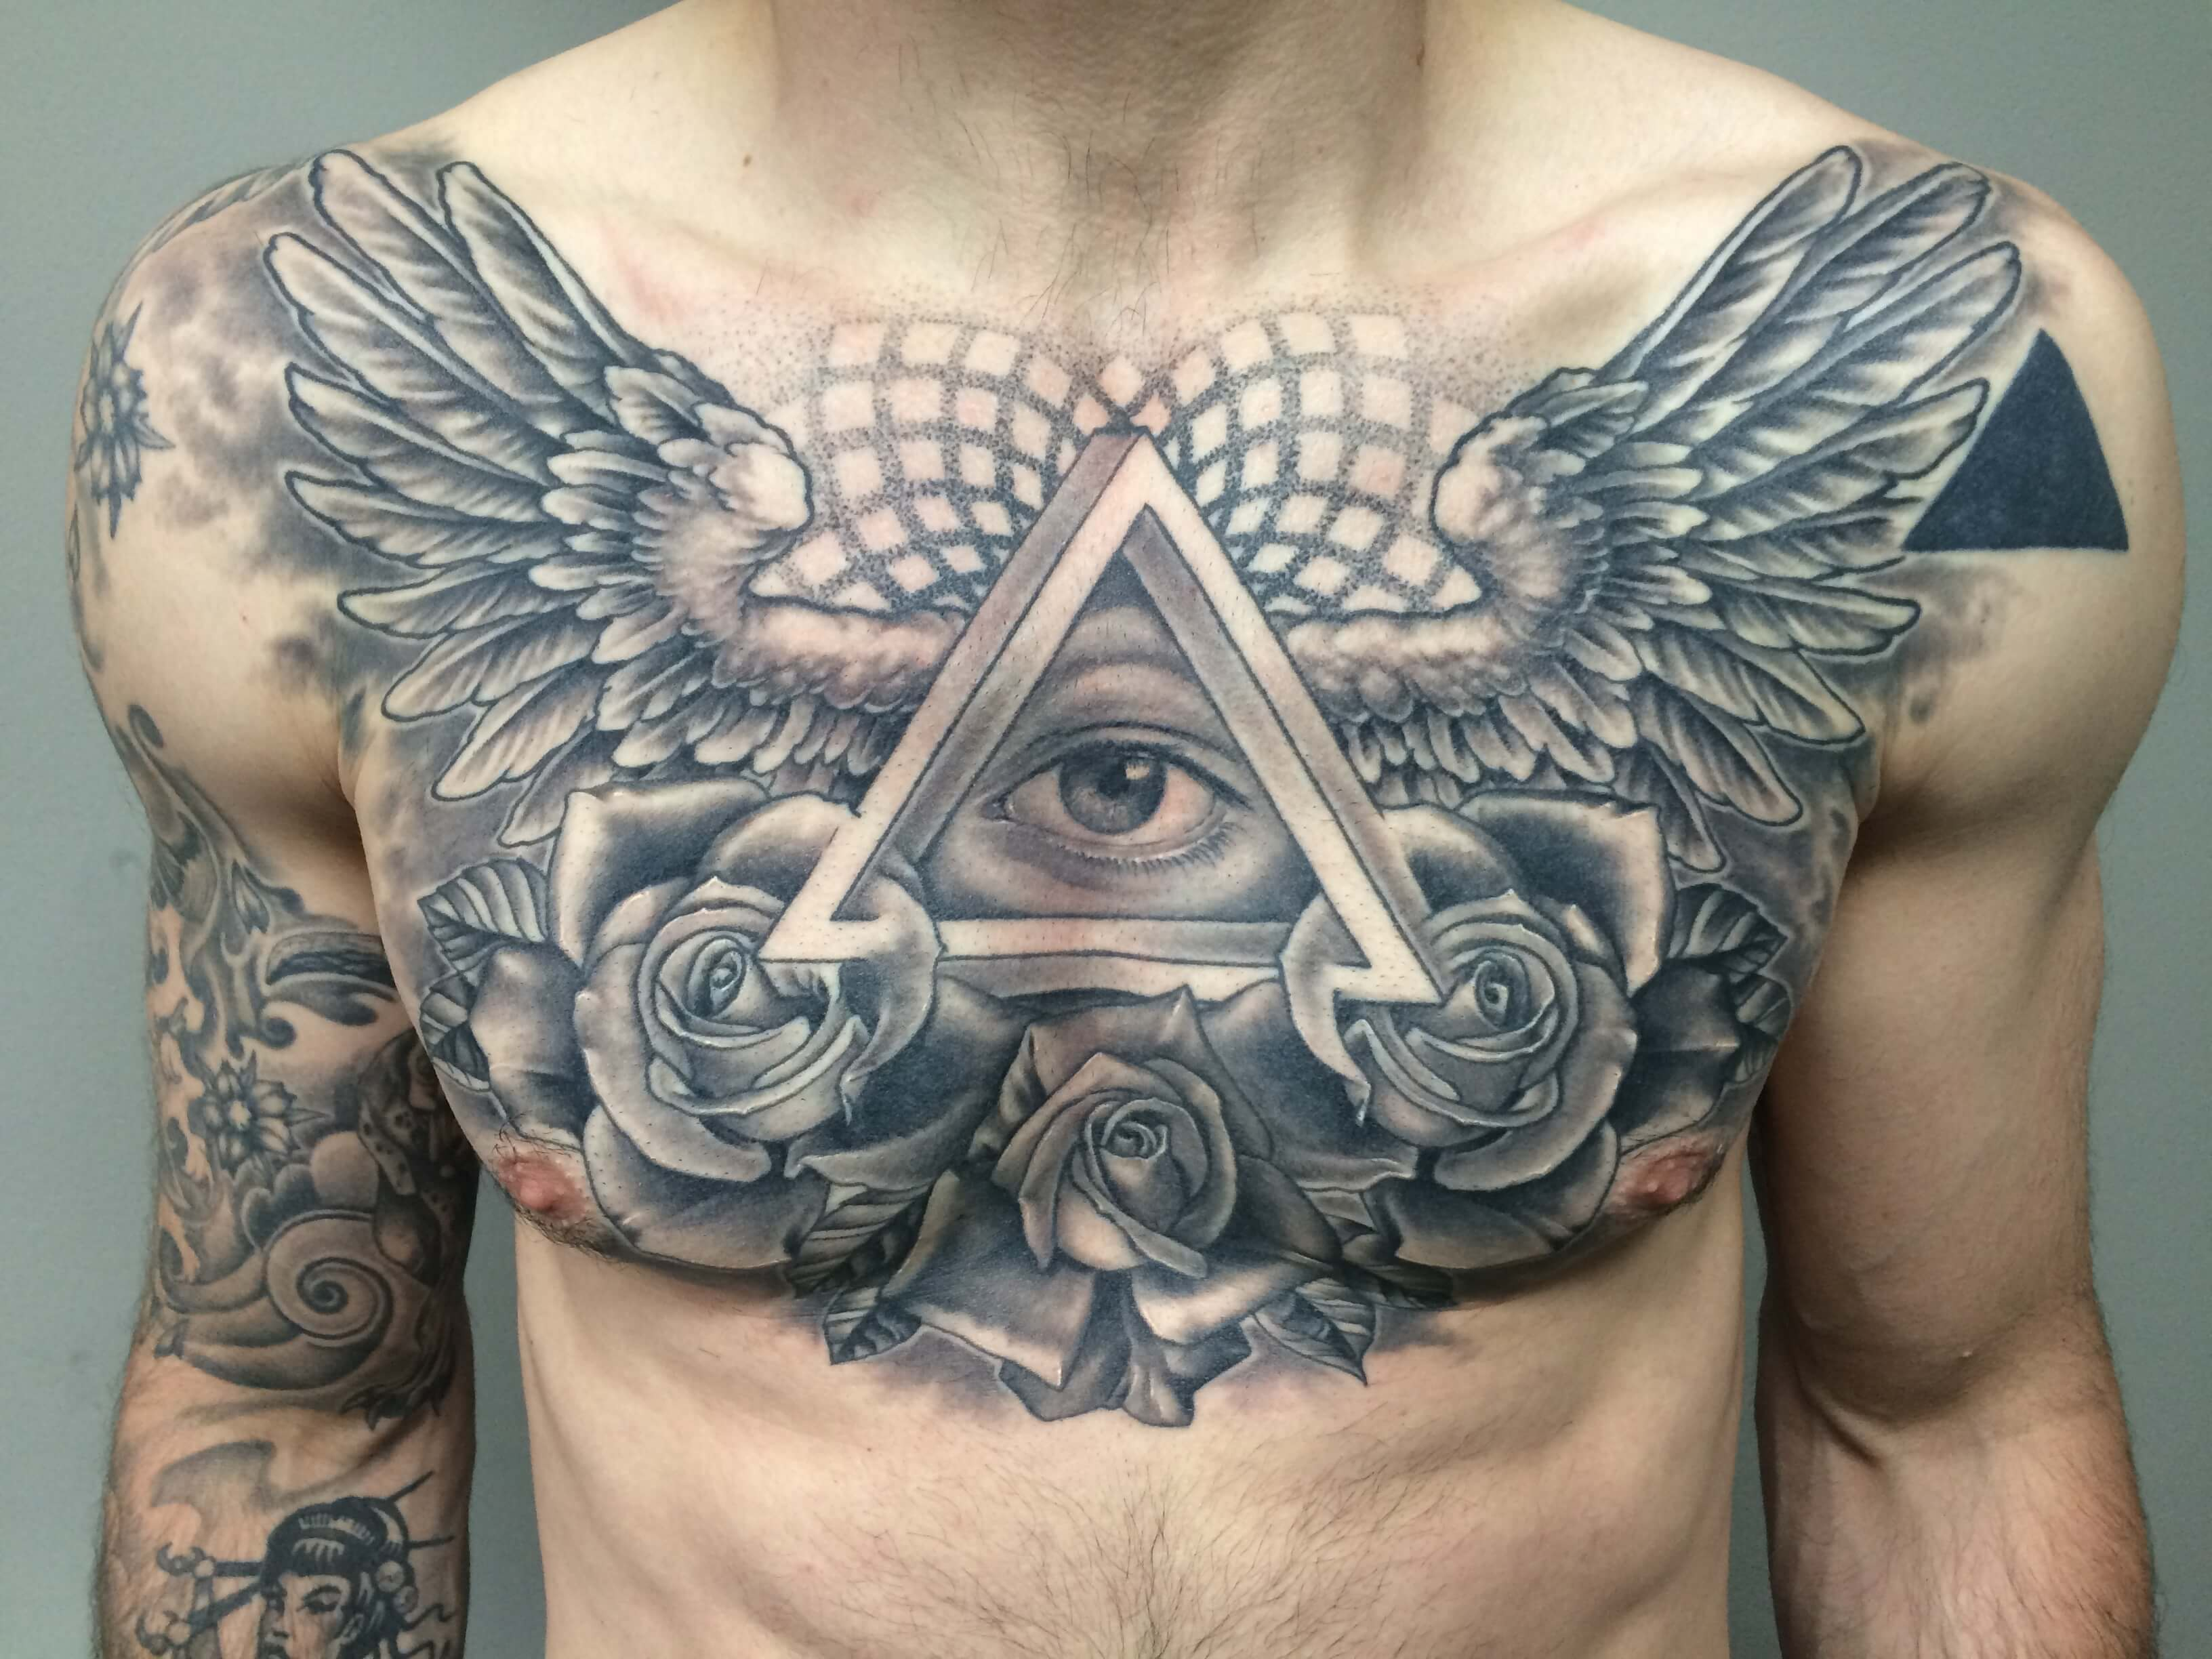 The 100 Best Chest Tattoos For Men Improb in size 3264 X 2448